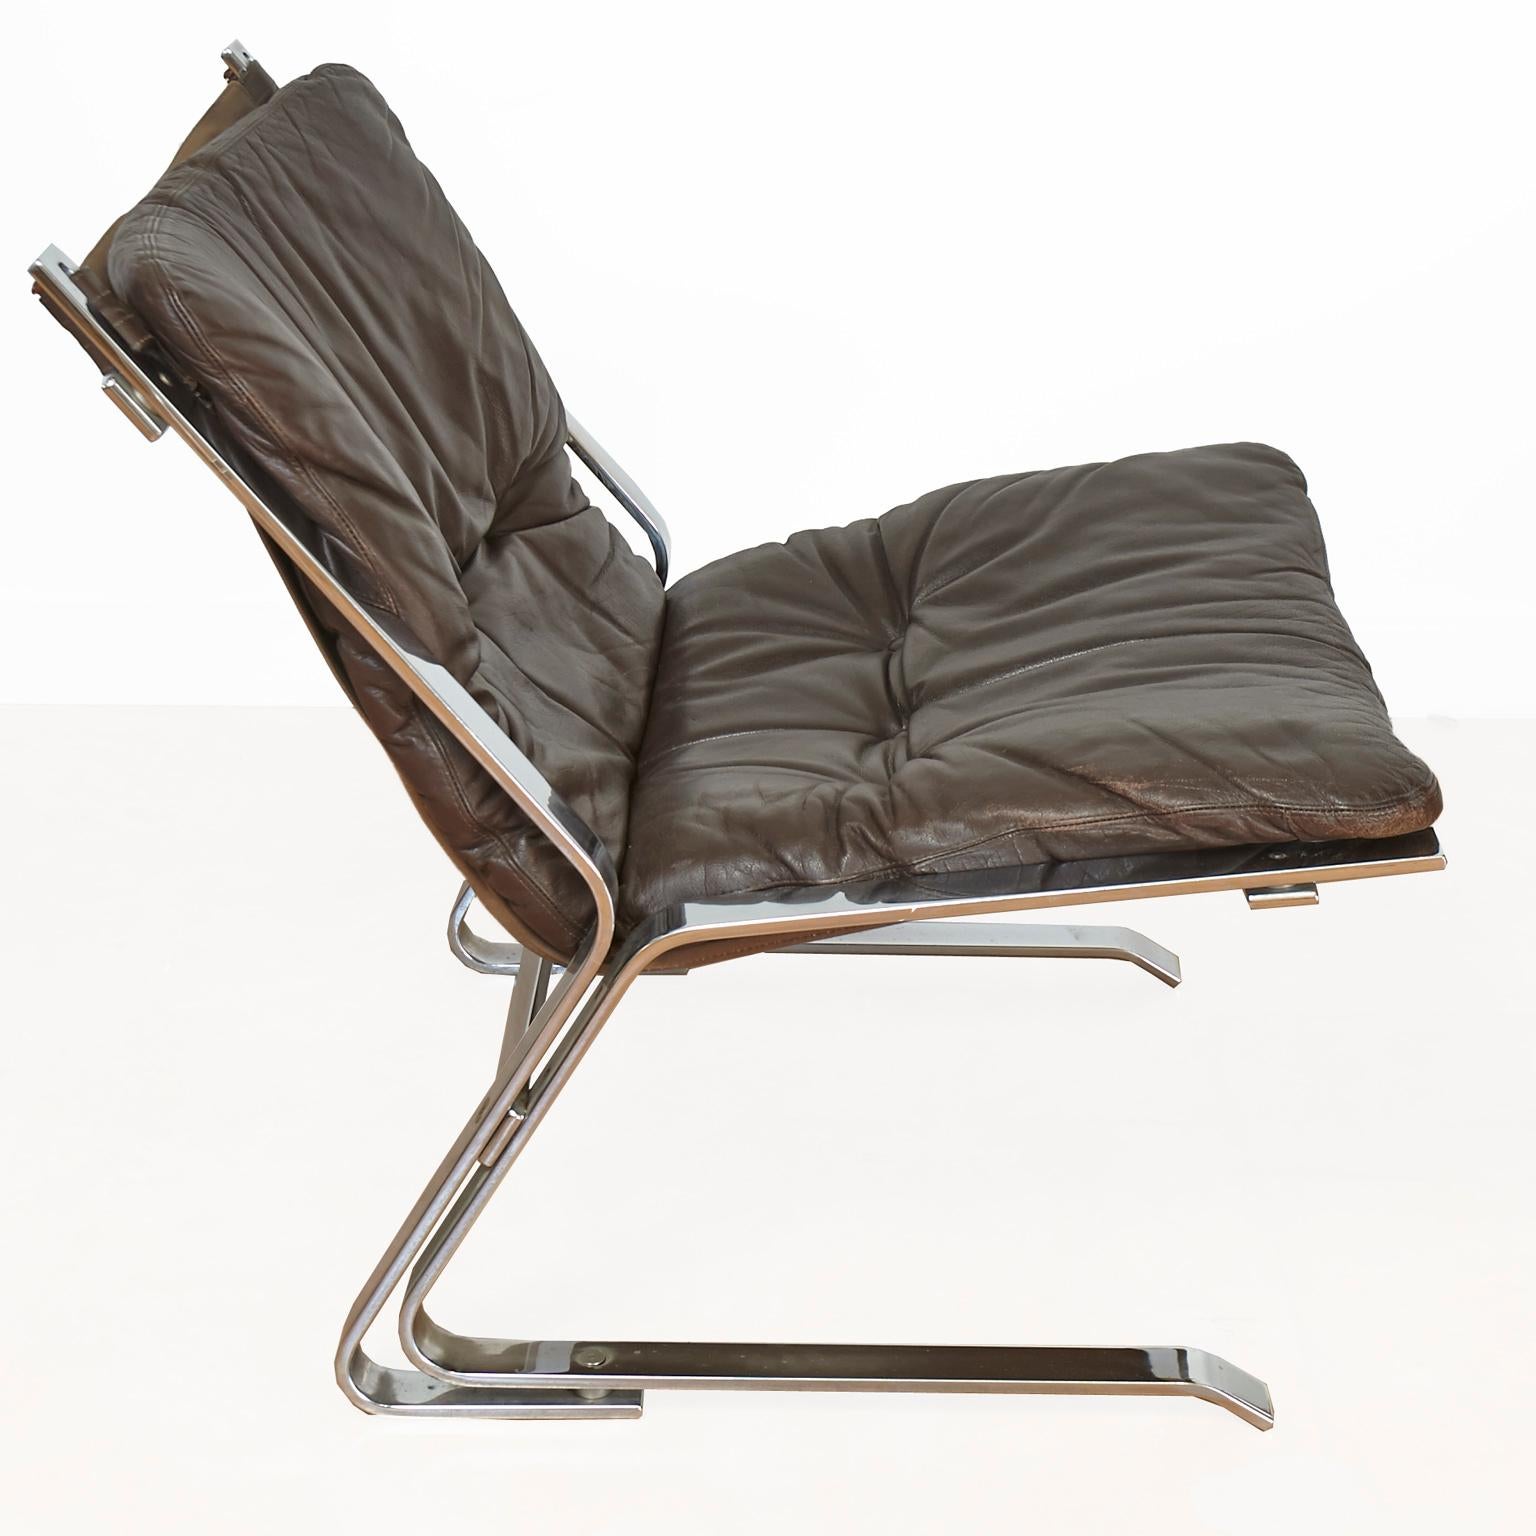 Scandinavian Modern Pair of Brown Leather Pirate Chairs by Elsa and Nordahl Solheim for Rykken